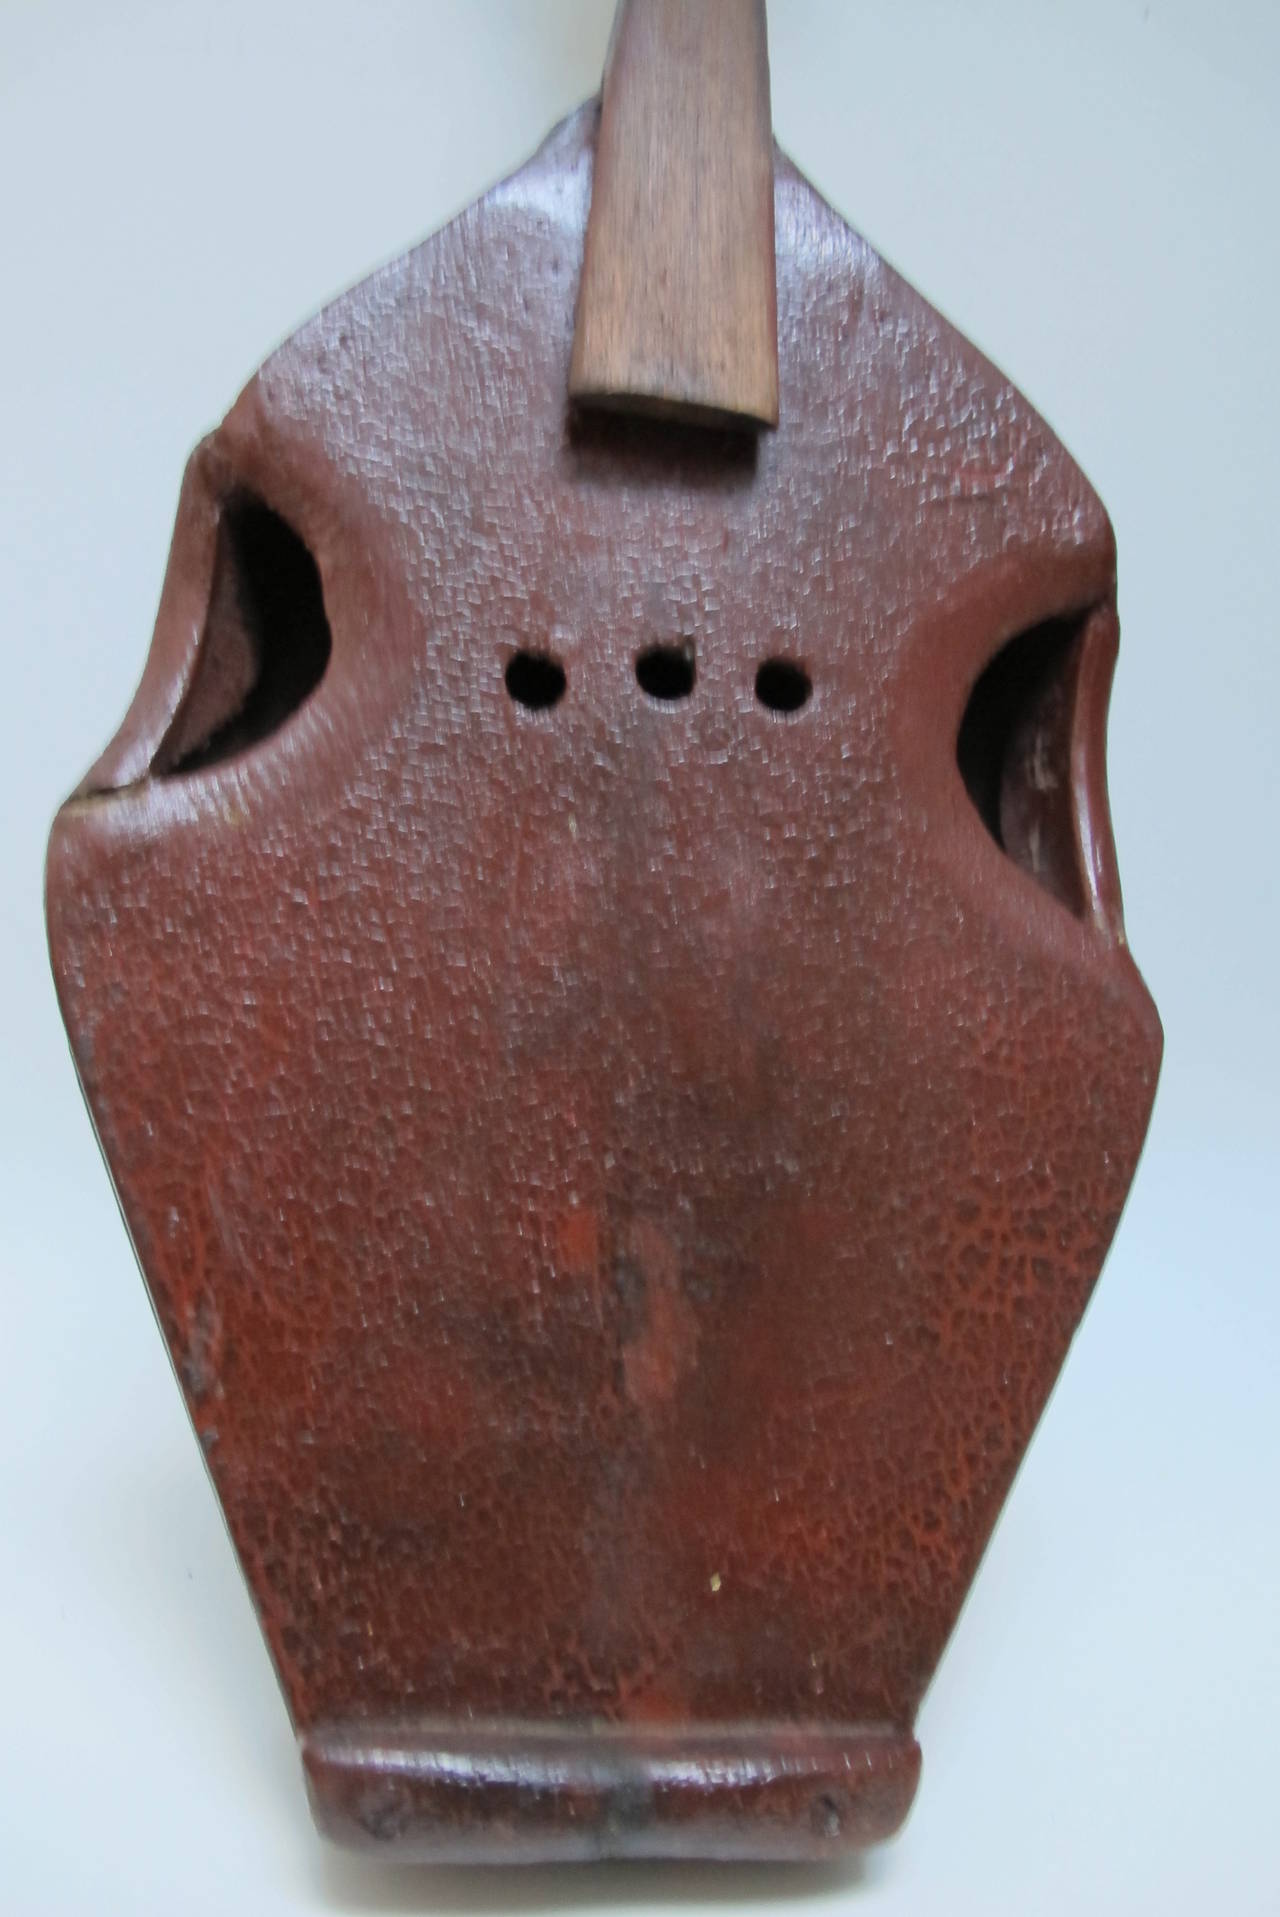 An unusual homemade Virginia fiddle incorporating a small fry pan in the body.
Other parts of the fiddle are wood including the neck and it has a painted finish with some paint alligatoring.